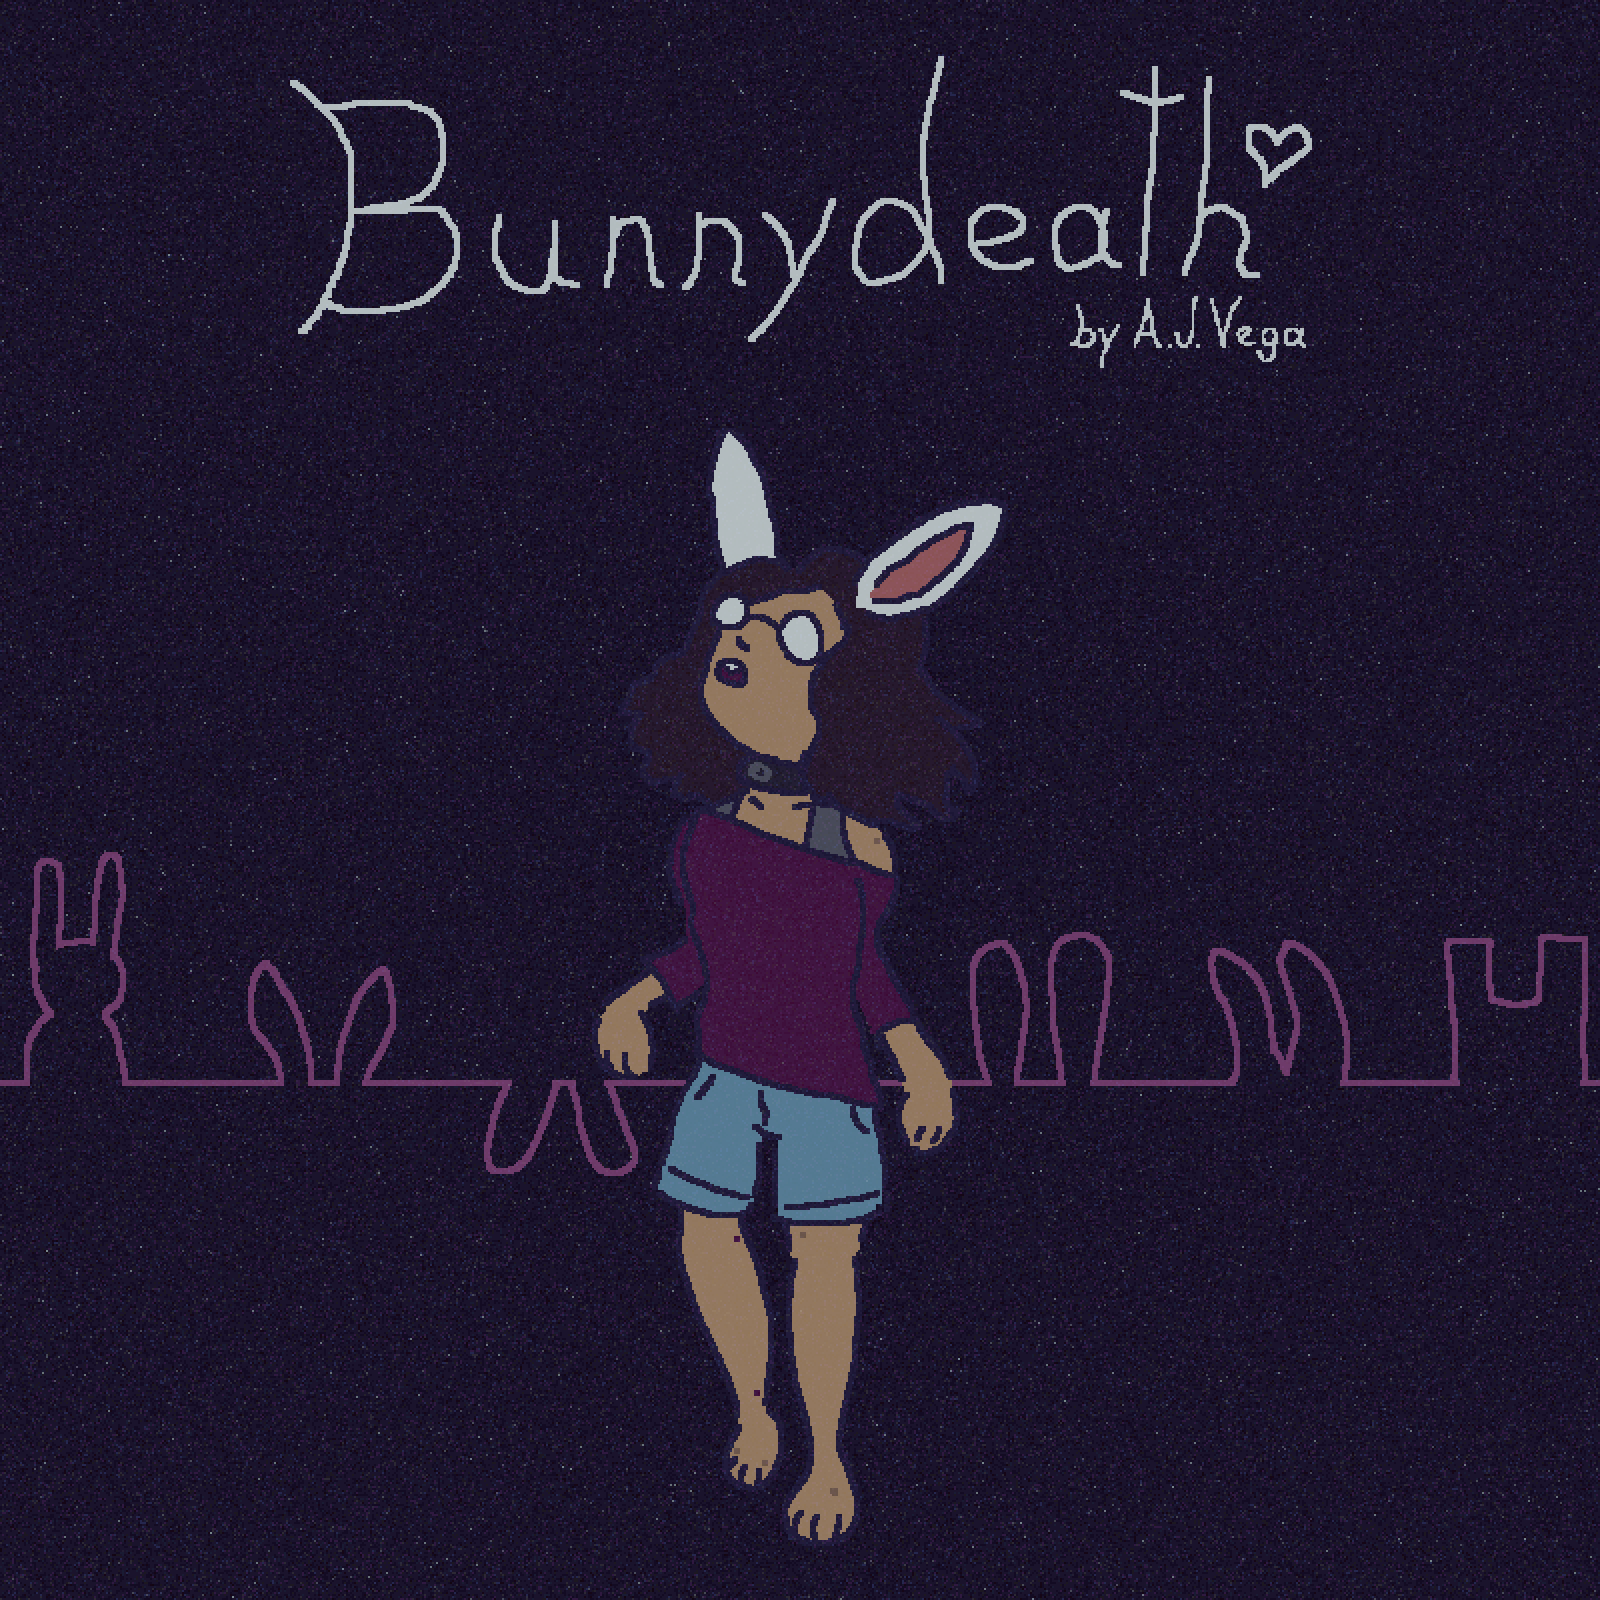 Cover of Bunnydeath by A.J. Vega